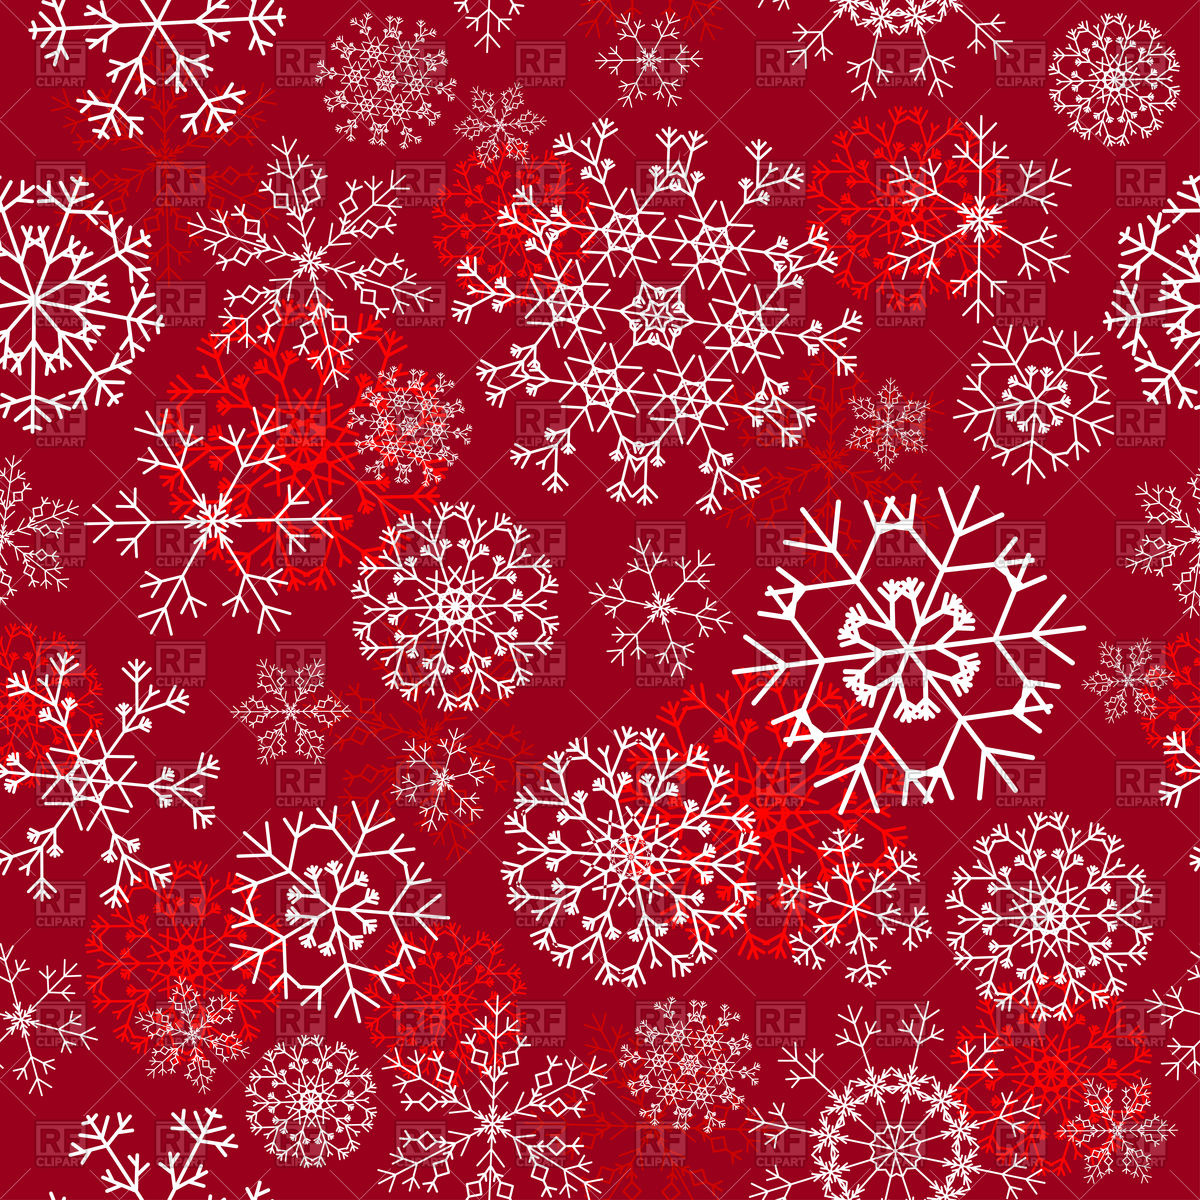 Seamless snowflakes Christmas background Vector Image of